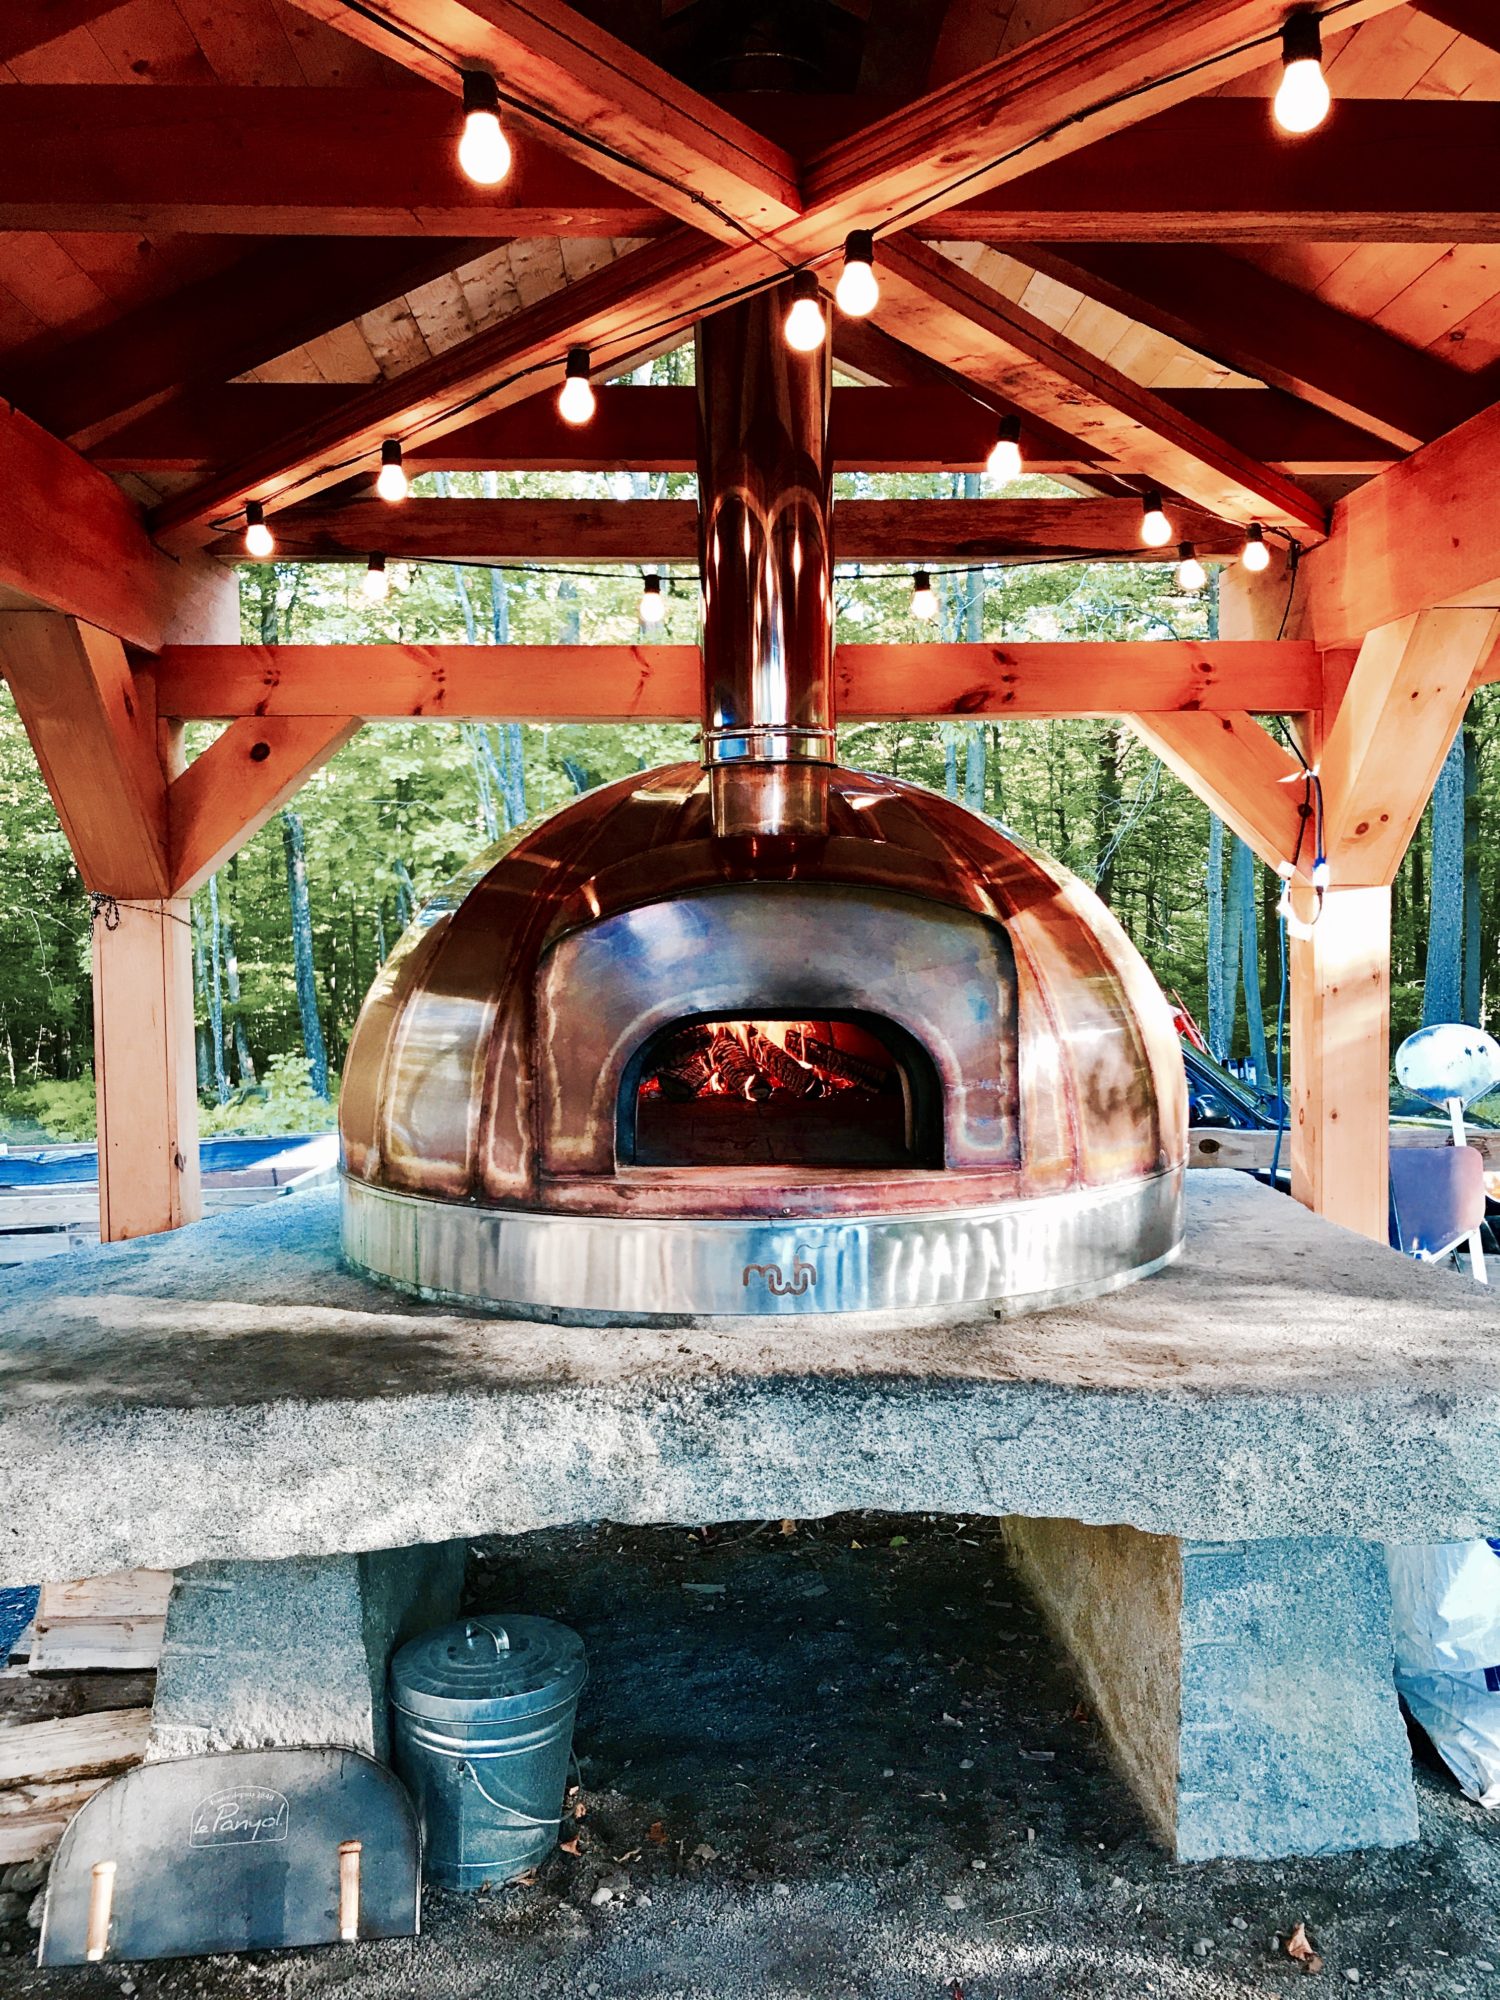 Texas Oven Co. Wooden Peel and a Pizza Oven Go Together - Texas